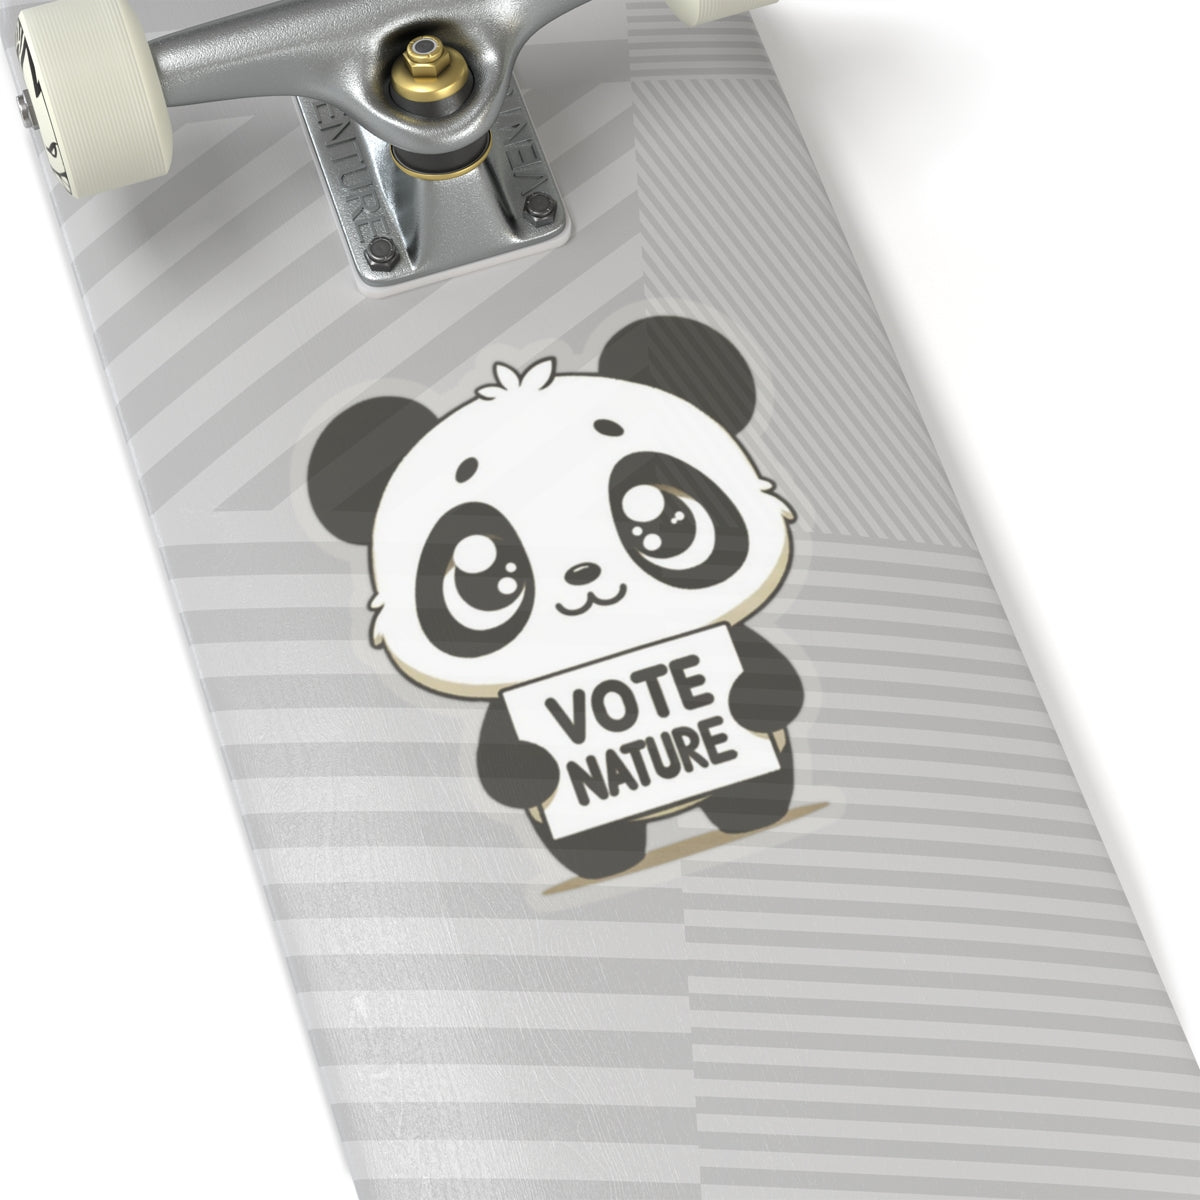 Inspirational Cute Panda Statement vinyl Sticker: Vote Nature! for laptop, kindle, phone, ipad, instrument case, notebook, mood board, wall